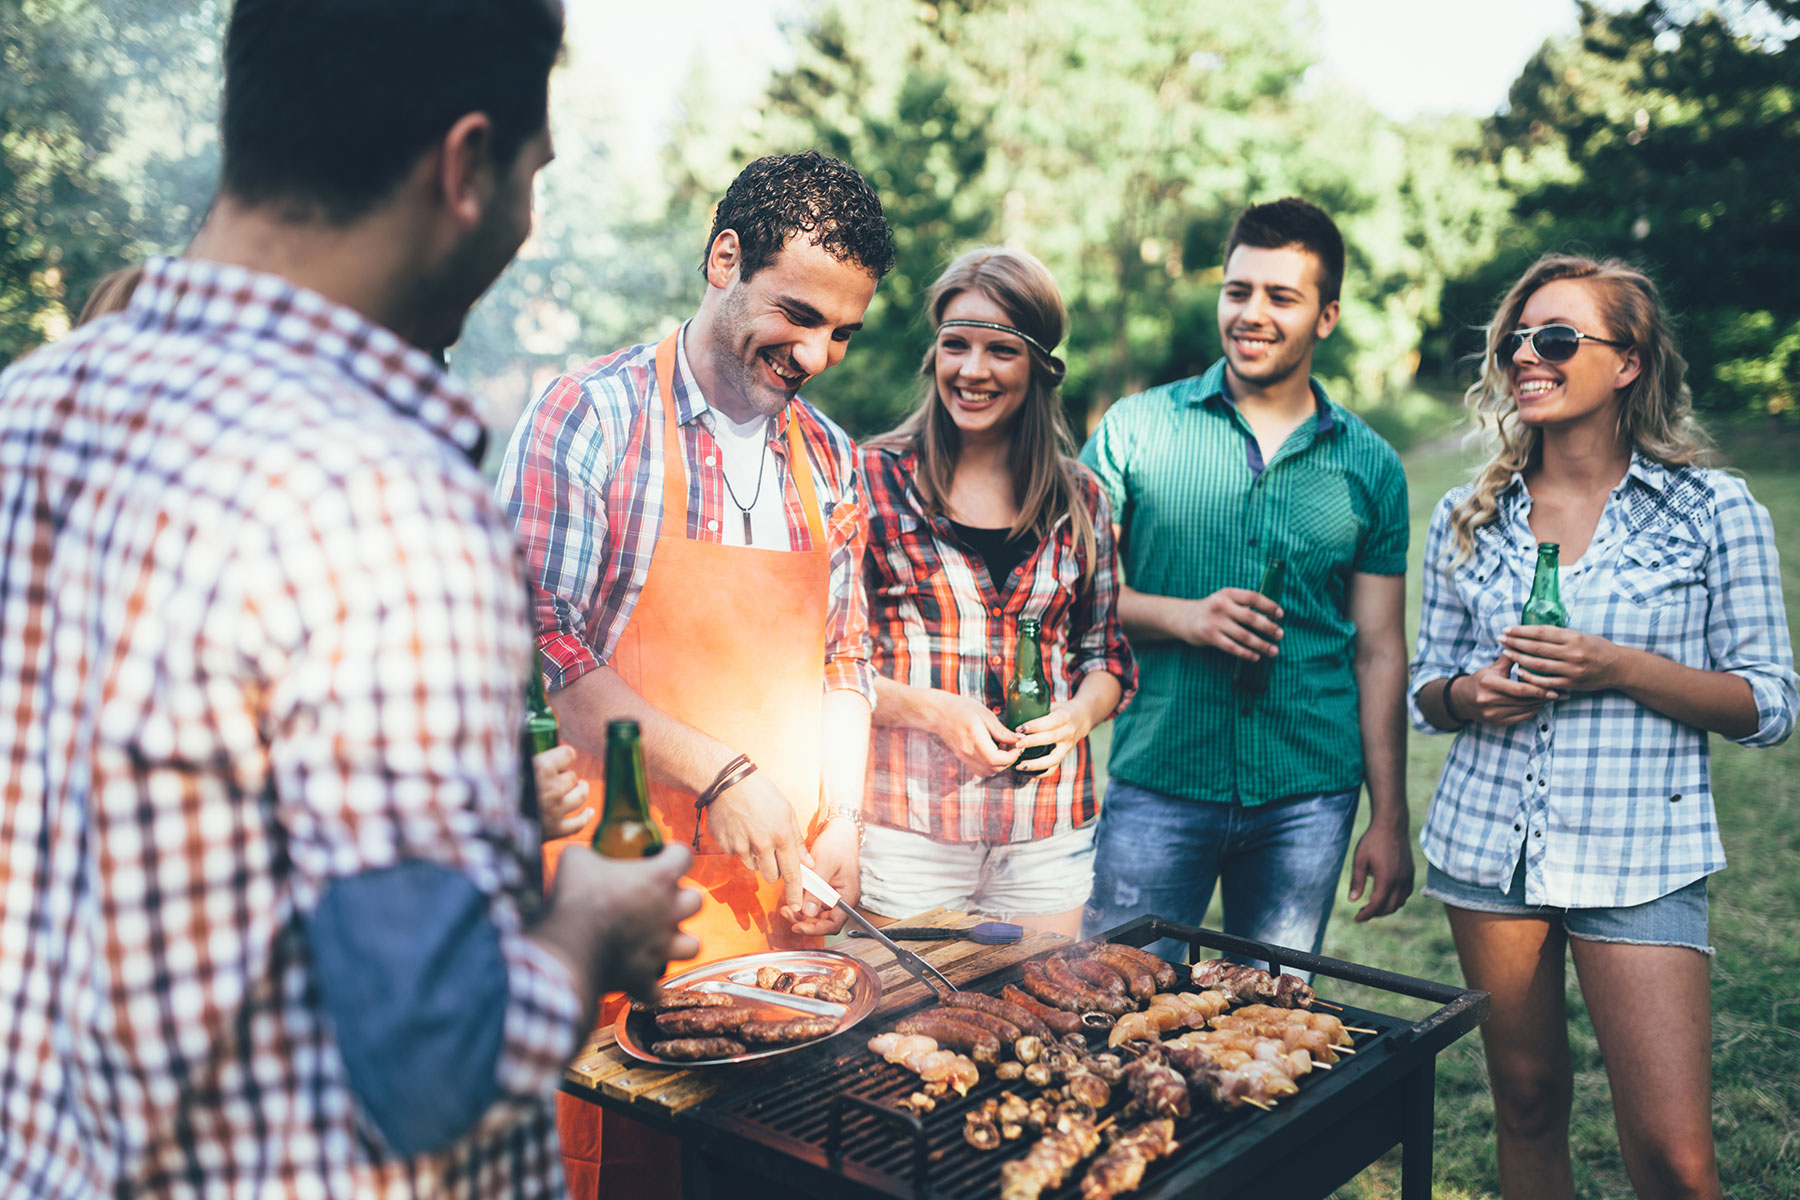 Group of friends wearing plaid shirts gathered around an outdoor grill filled with meat